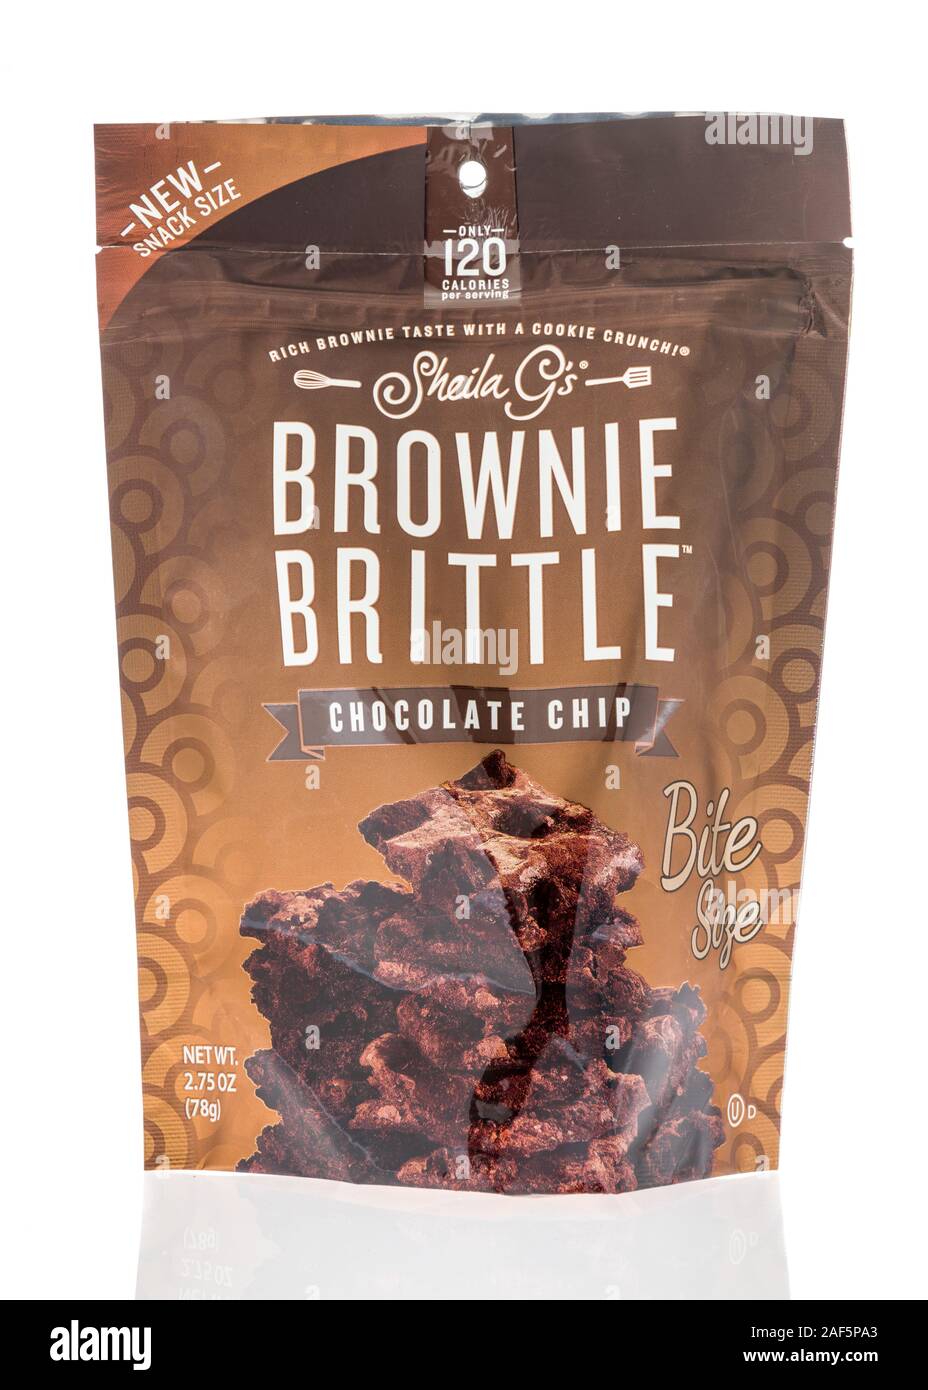 Winneconne, WI - 11 November 2019: A  package of Shelila Gs brownie brittle on an isolated background Stock Photo